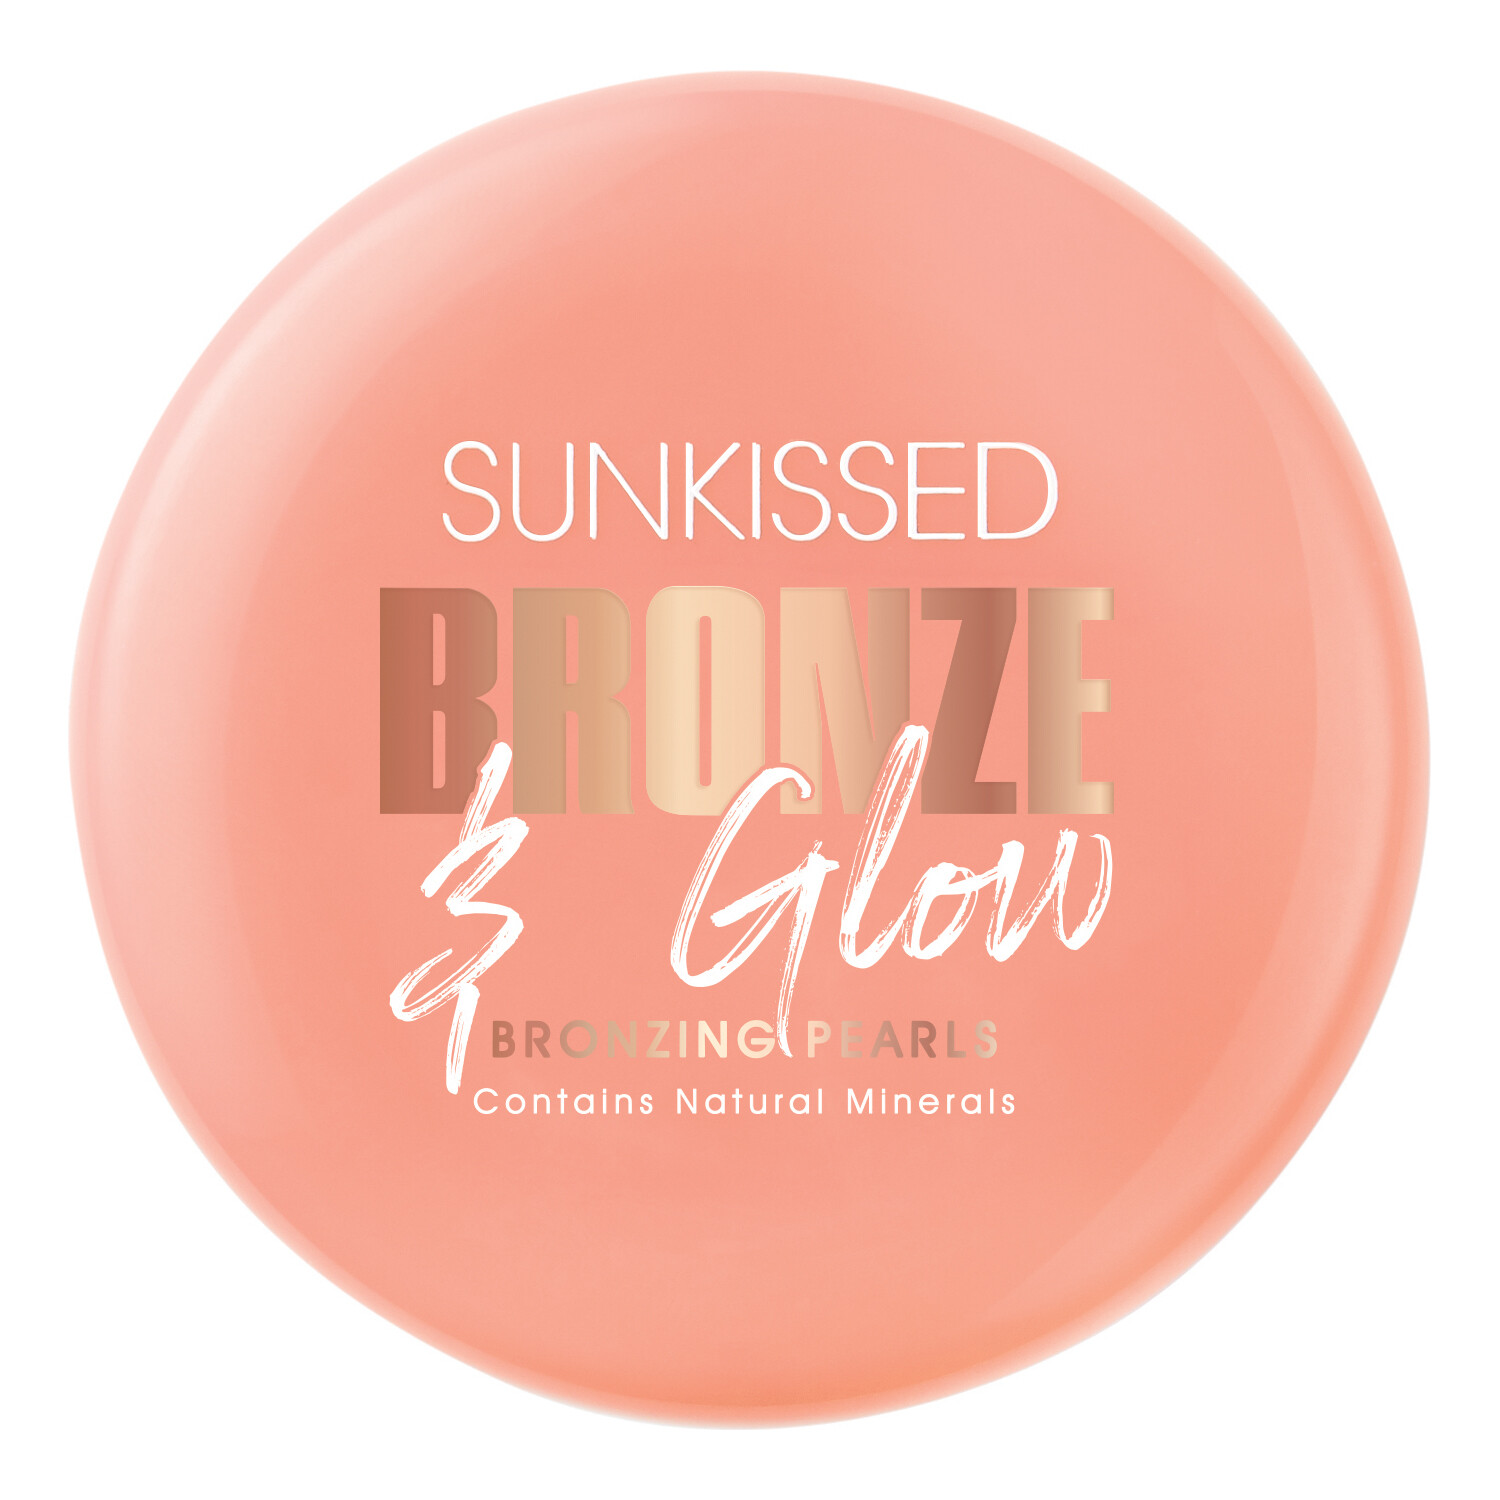 Sunkissed Bronze and Glow Bronzing Pearls Image 1